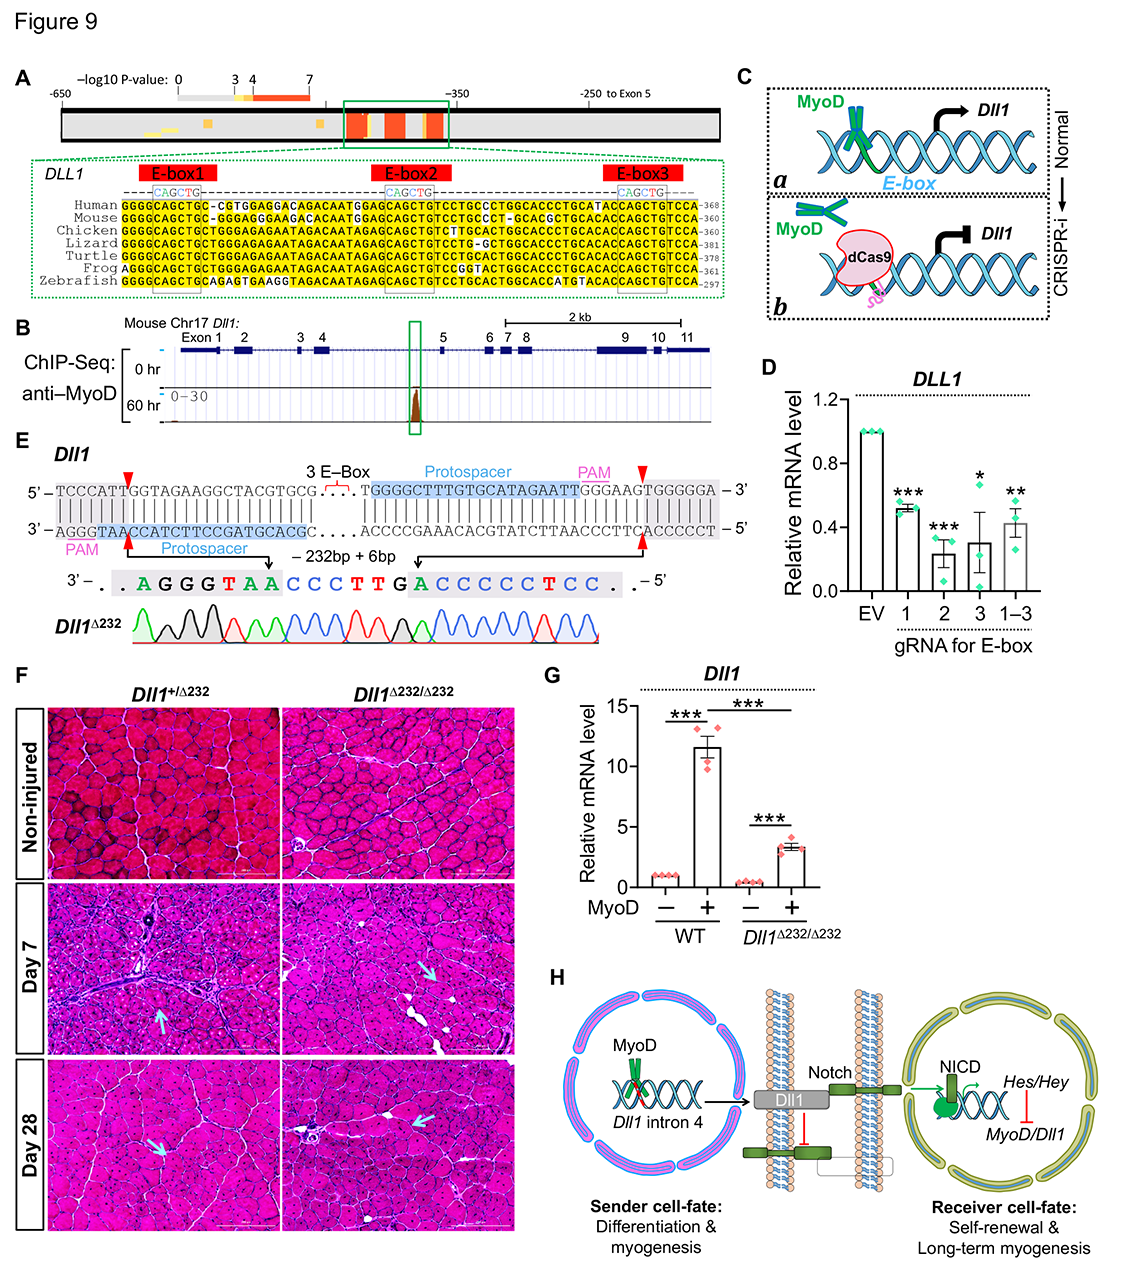 Feedback regulation of Notch signaling and myogenesis connected by MyoD–Dll1 axis.